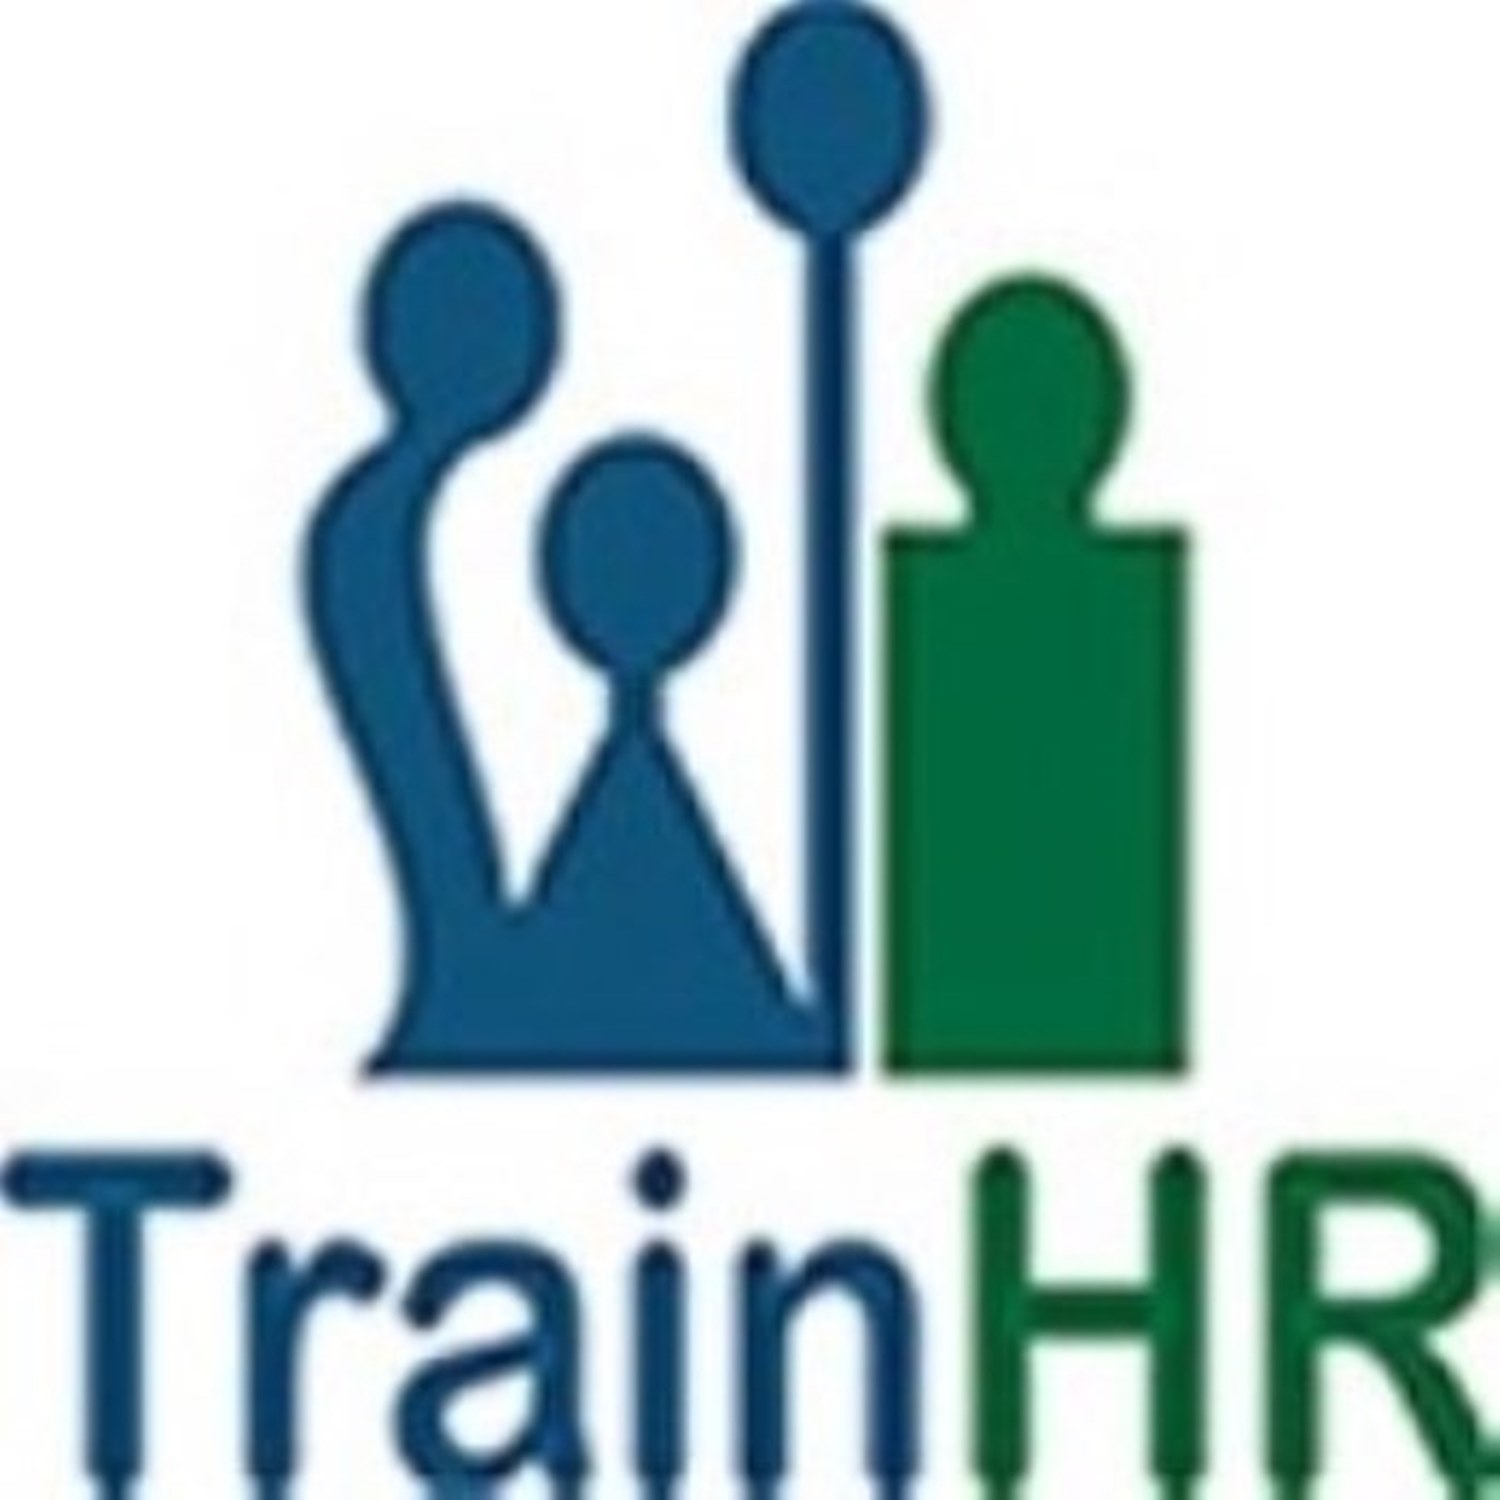 webinar on the topic '  Work Smarter With One Note' conducting by TrainHR, Fremont, California, United States